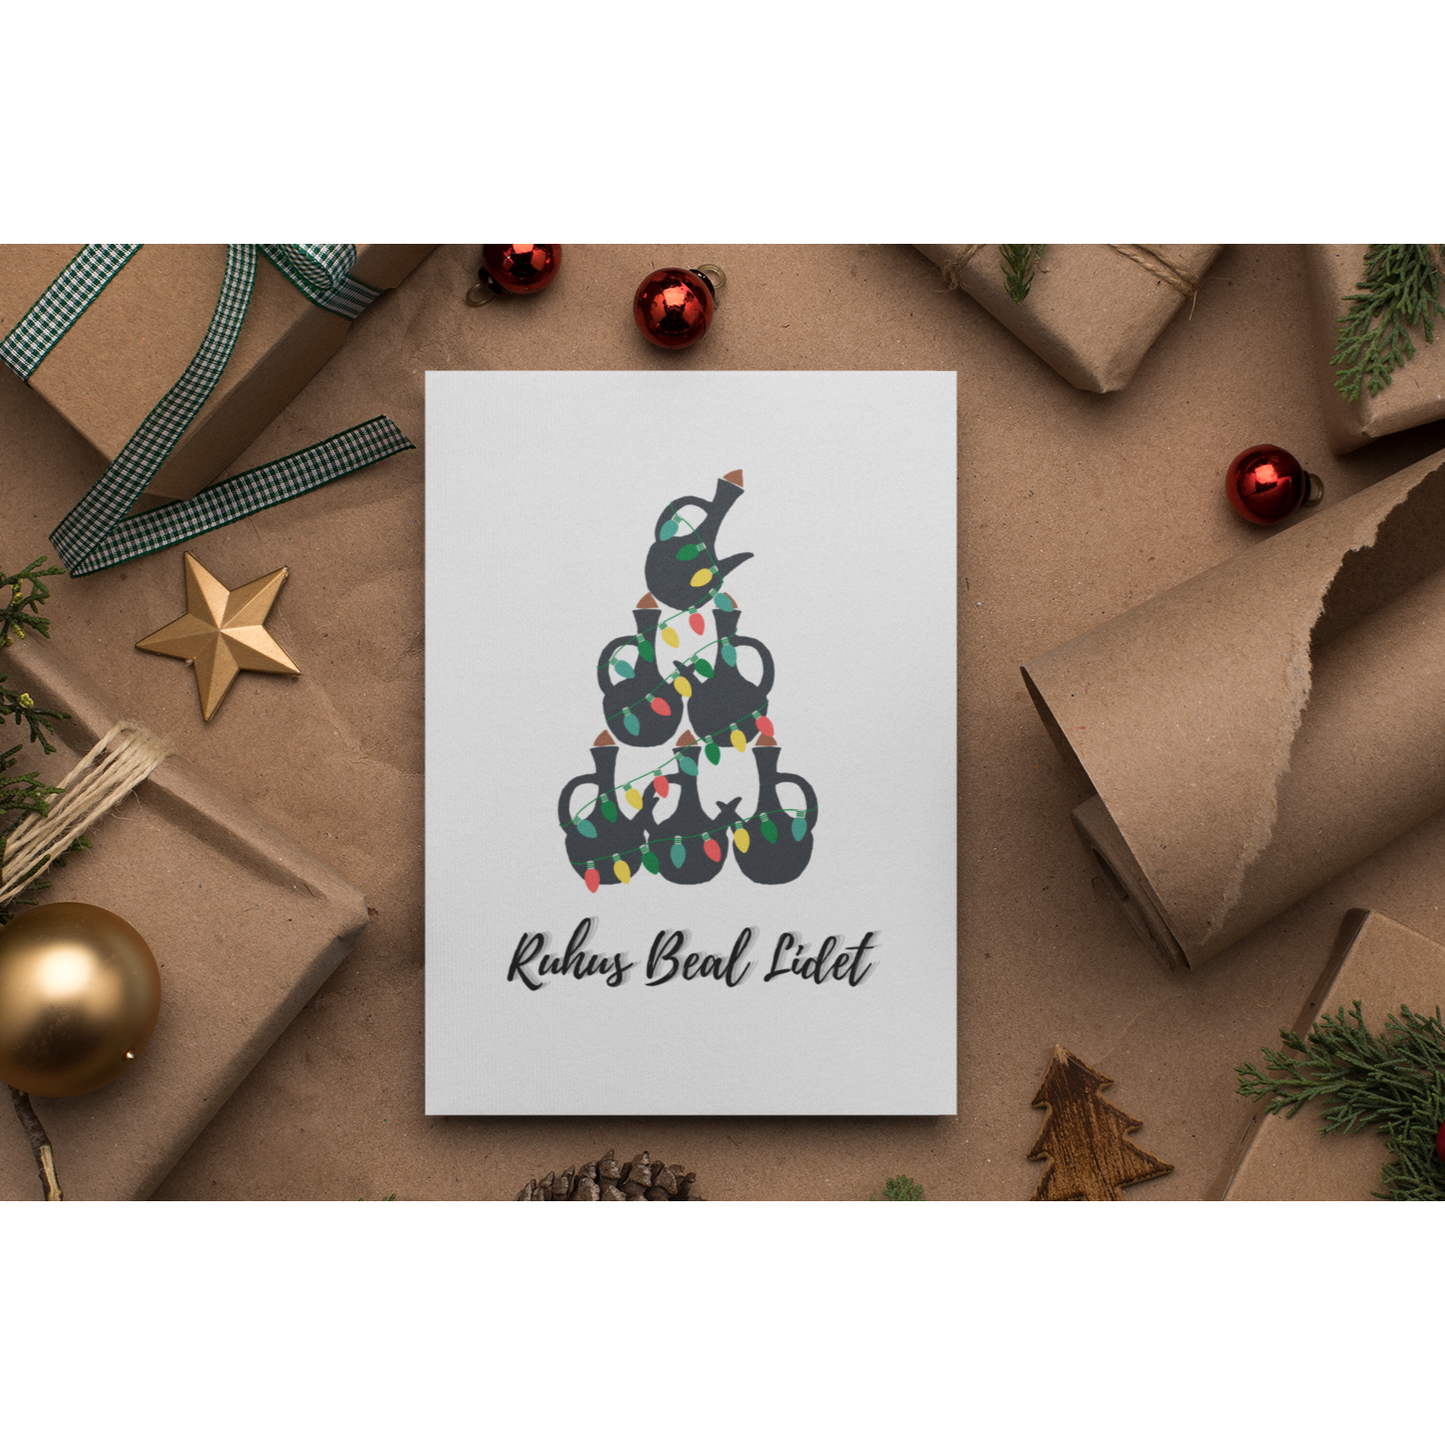 Ruhus Beal Lidet Christmas Card | Habesha Ethiopian Eritrean Card Shop our original art, greeting cards, coffee mugs, stickers, hats, shirts and crewnecks all inspired by our Eritrean and Ethiopian-American perspectives, experiences, and points of view.